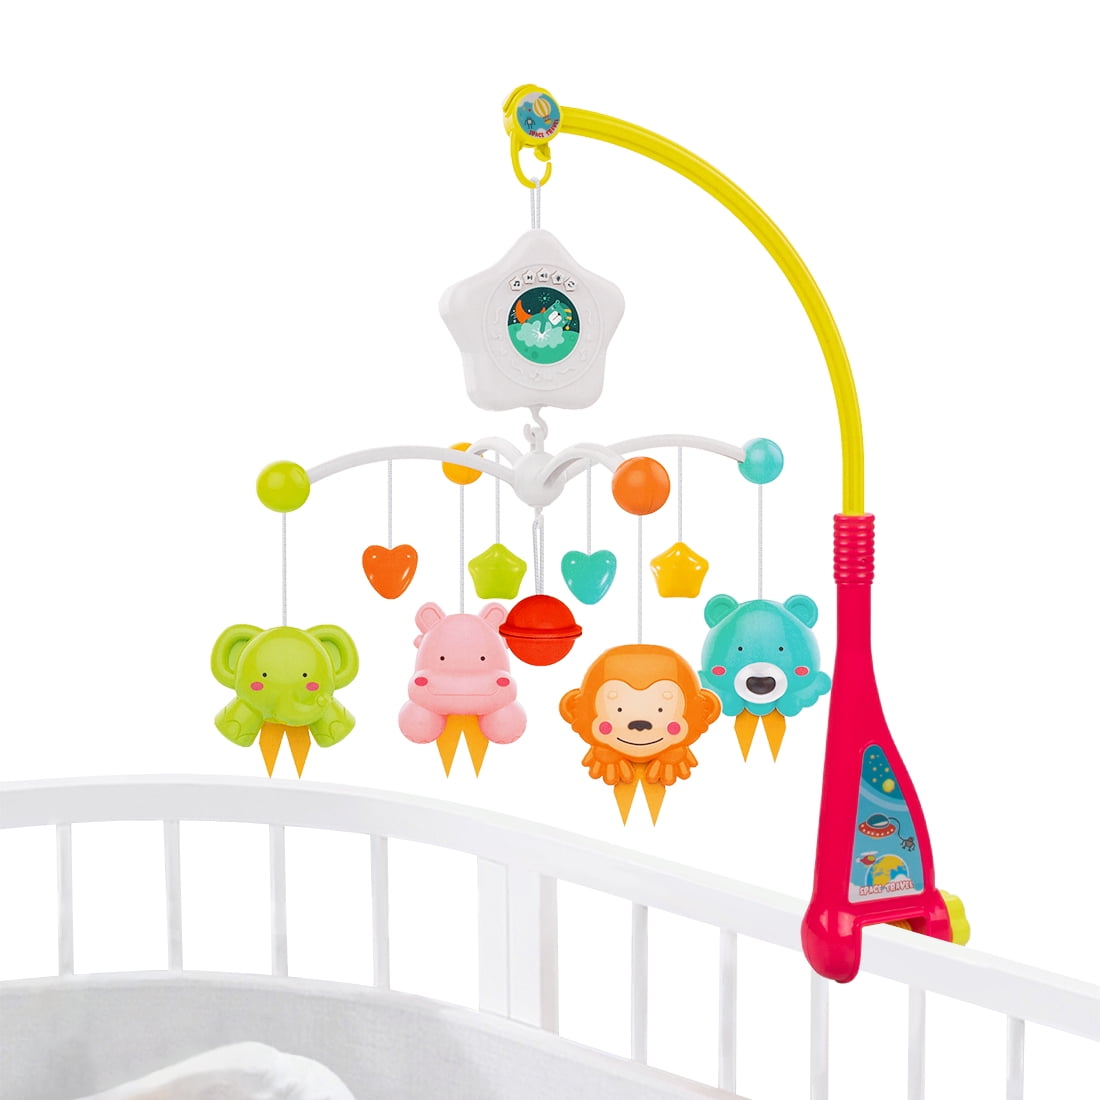 FISHER PRICE Baby Infant Musical Projection Mobile Replacement PARTS Toys Butterfly Dreams 3-in-1 Projection Mobile Mattel CDN41 / Toys 